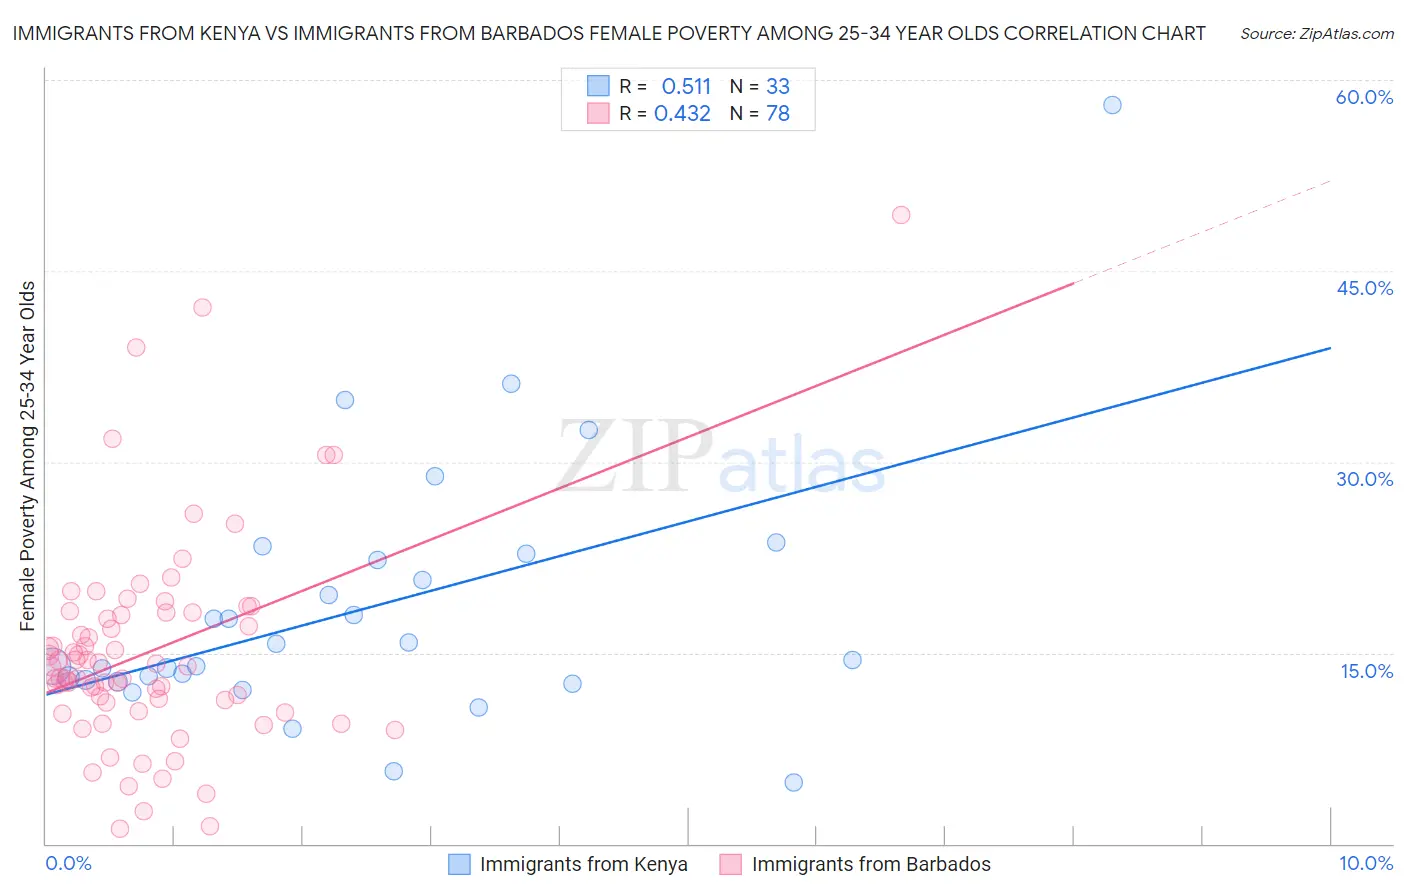 Immigrants from Kenya vs Immigrants from Barbados Female Poverty Among 25-34 Year Olds